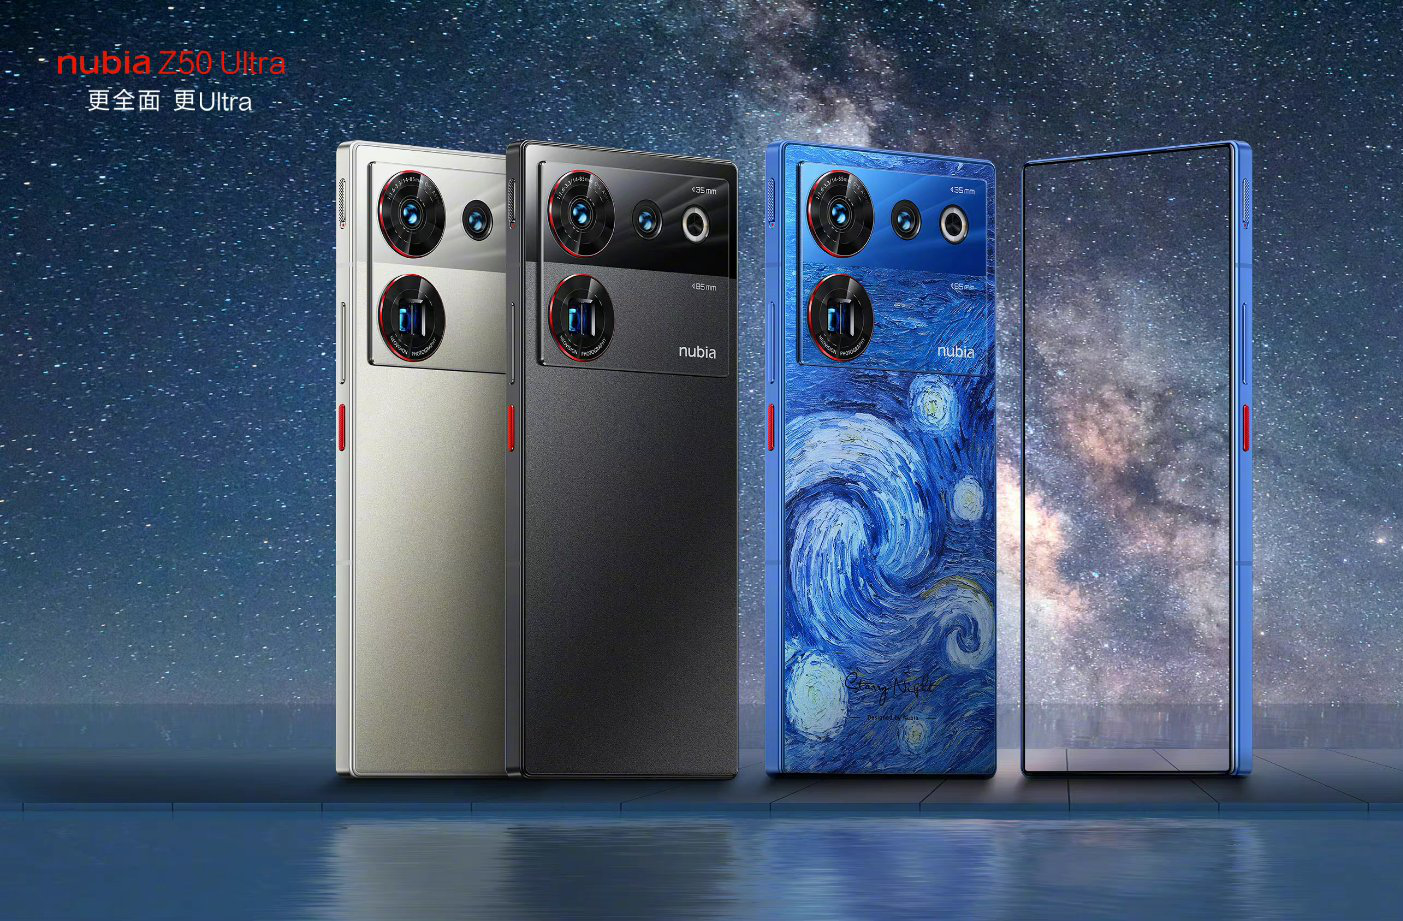 ZTE Nubia Z50 Ultra arrives as new flagship smartphone with